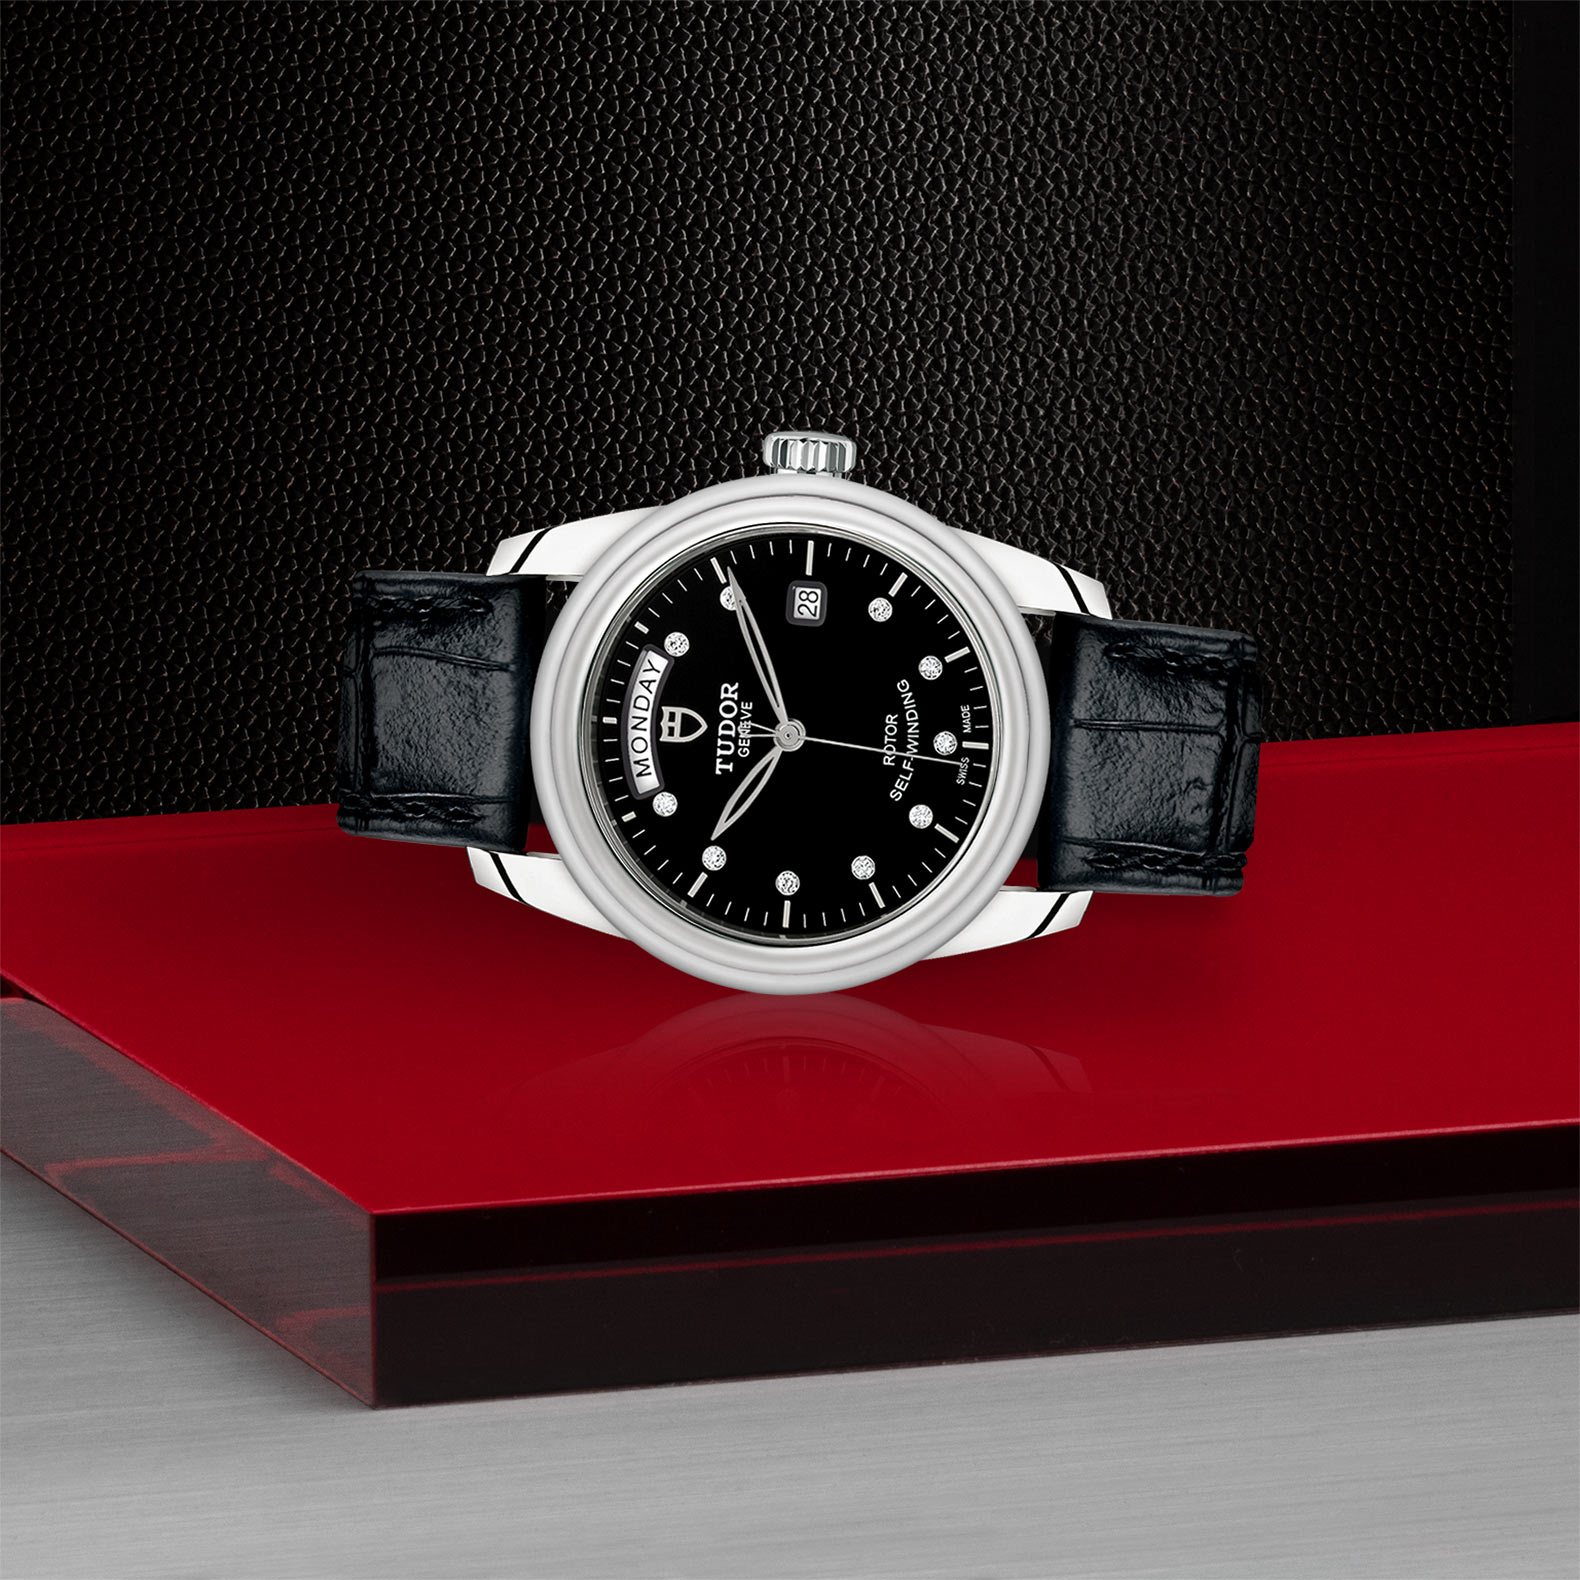 TUDOR Glamour Date+Day - M56000-0049